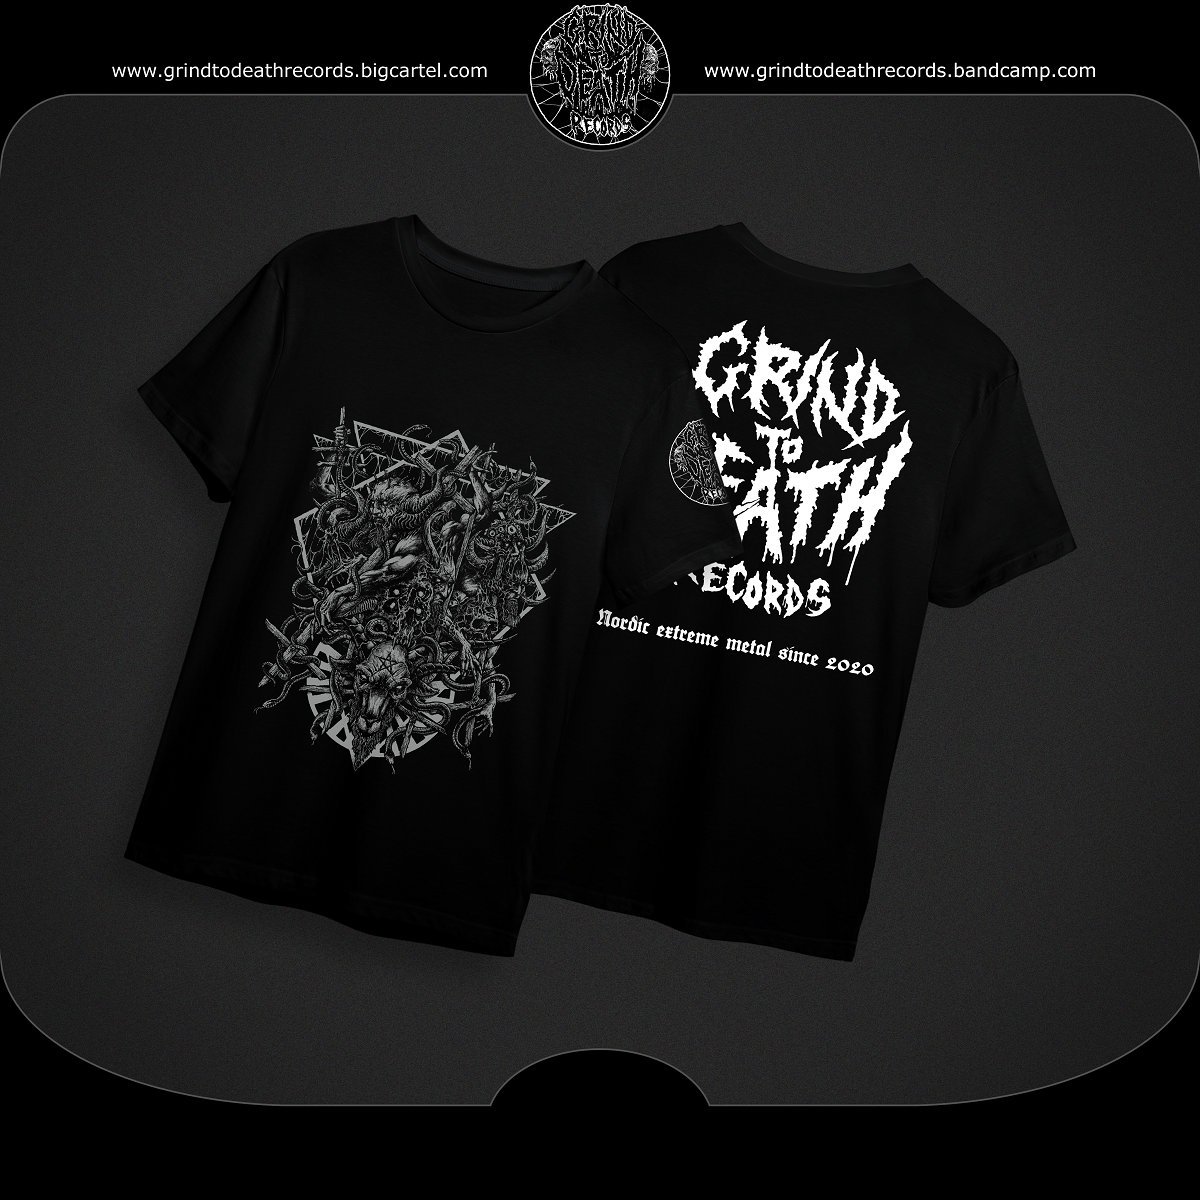 Grind to Death Records T-Shirt